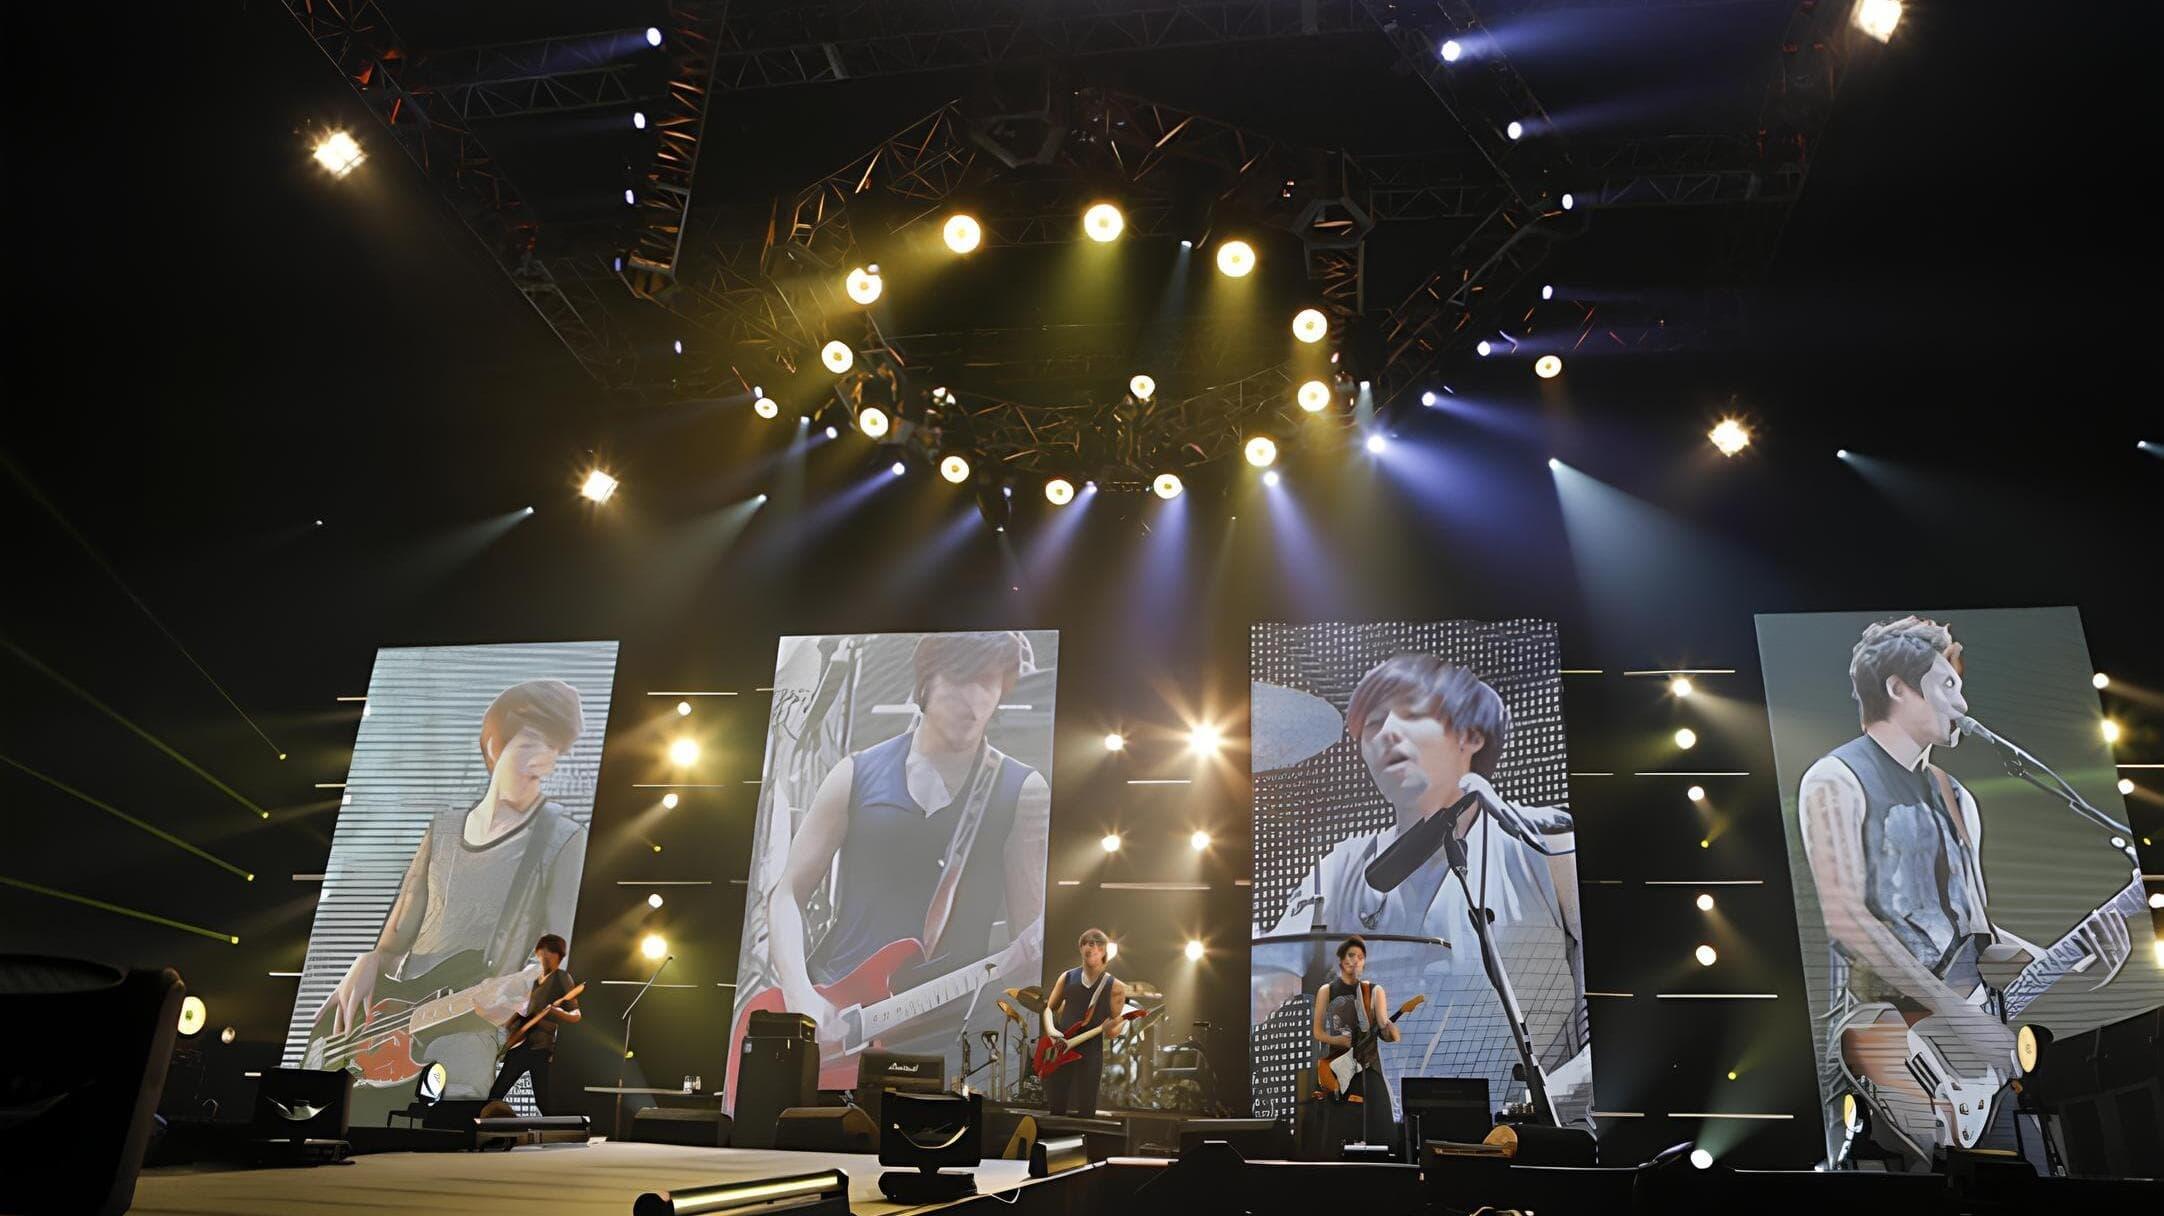 CNBLUE Arena Tour 2012 ～COME ON!!!～ backdrop